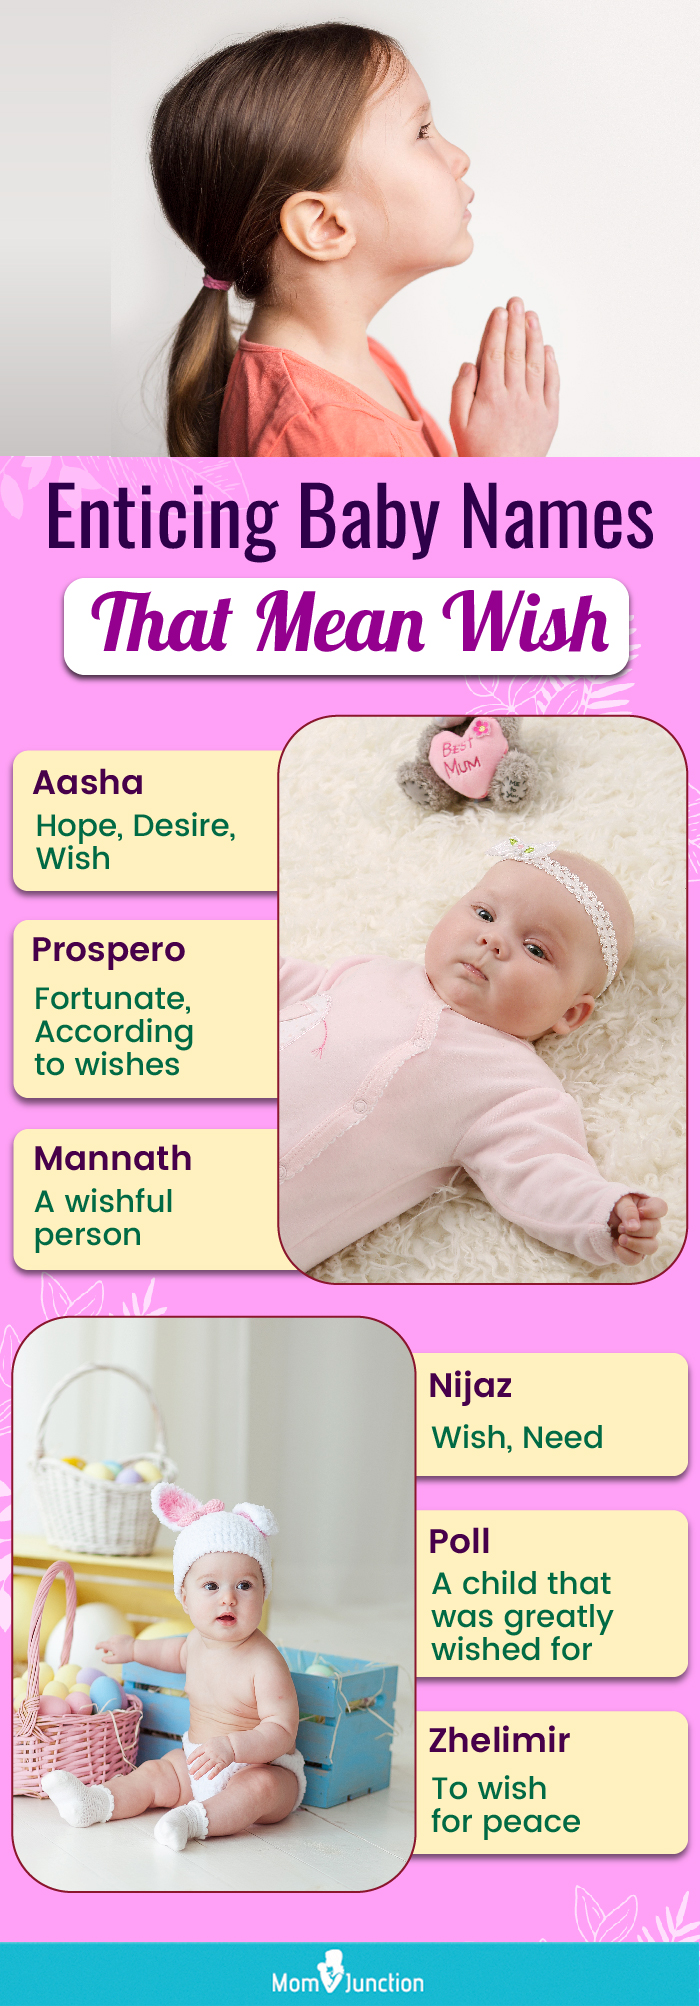 enticing baby names that mean wish (infographic)